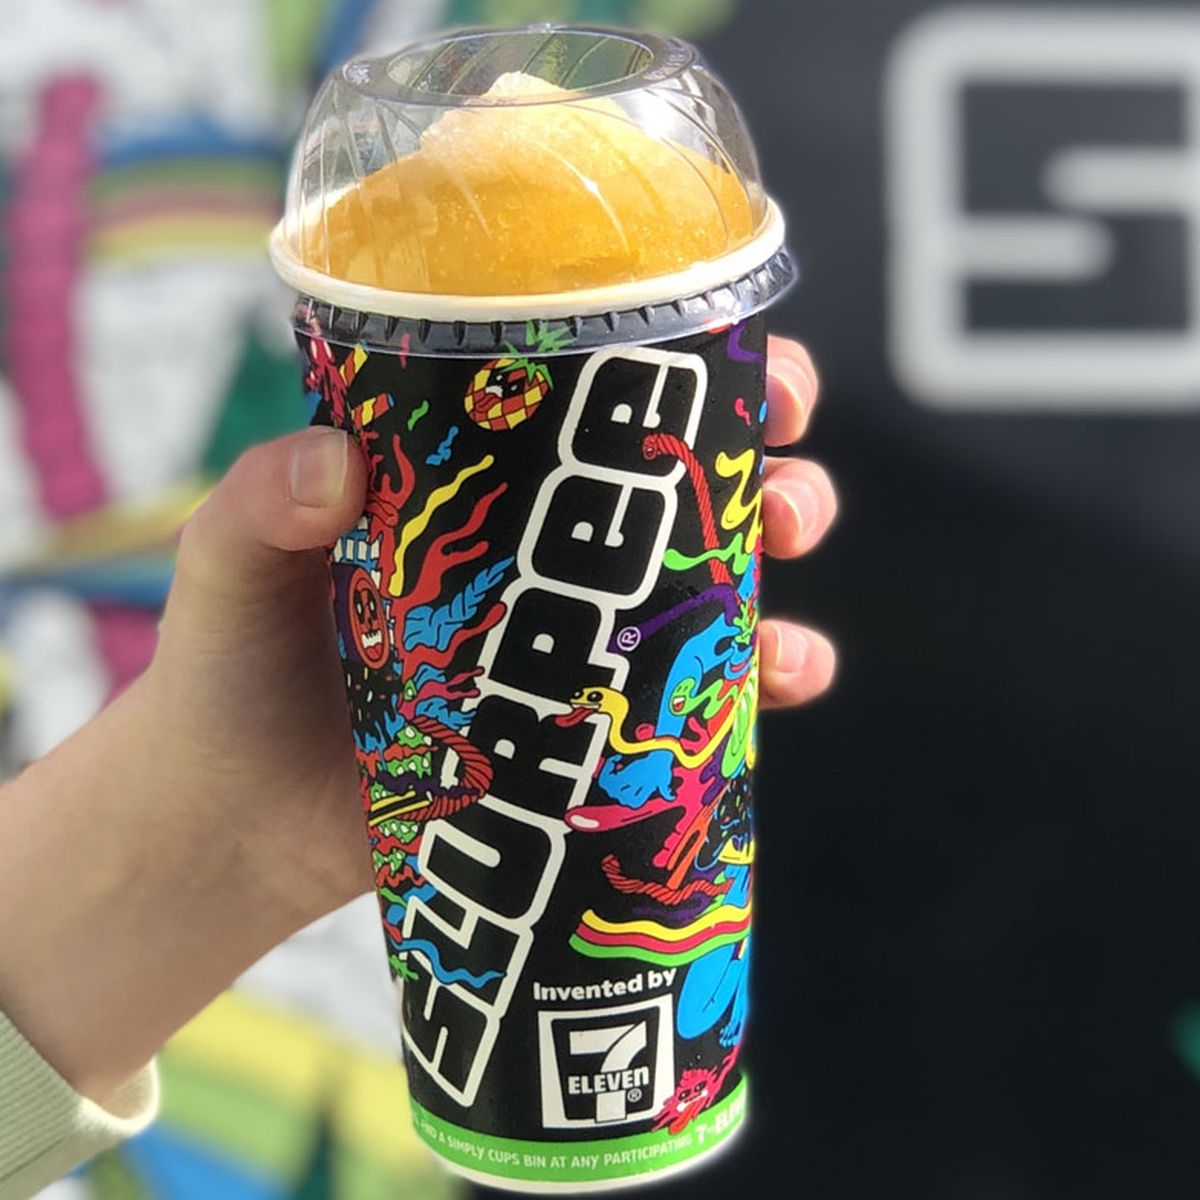 Sugary drinks Australia: Cancer Council says 7-Eleven slurpees contain more sugar than a week's recommended intake